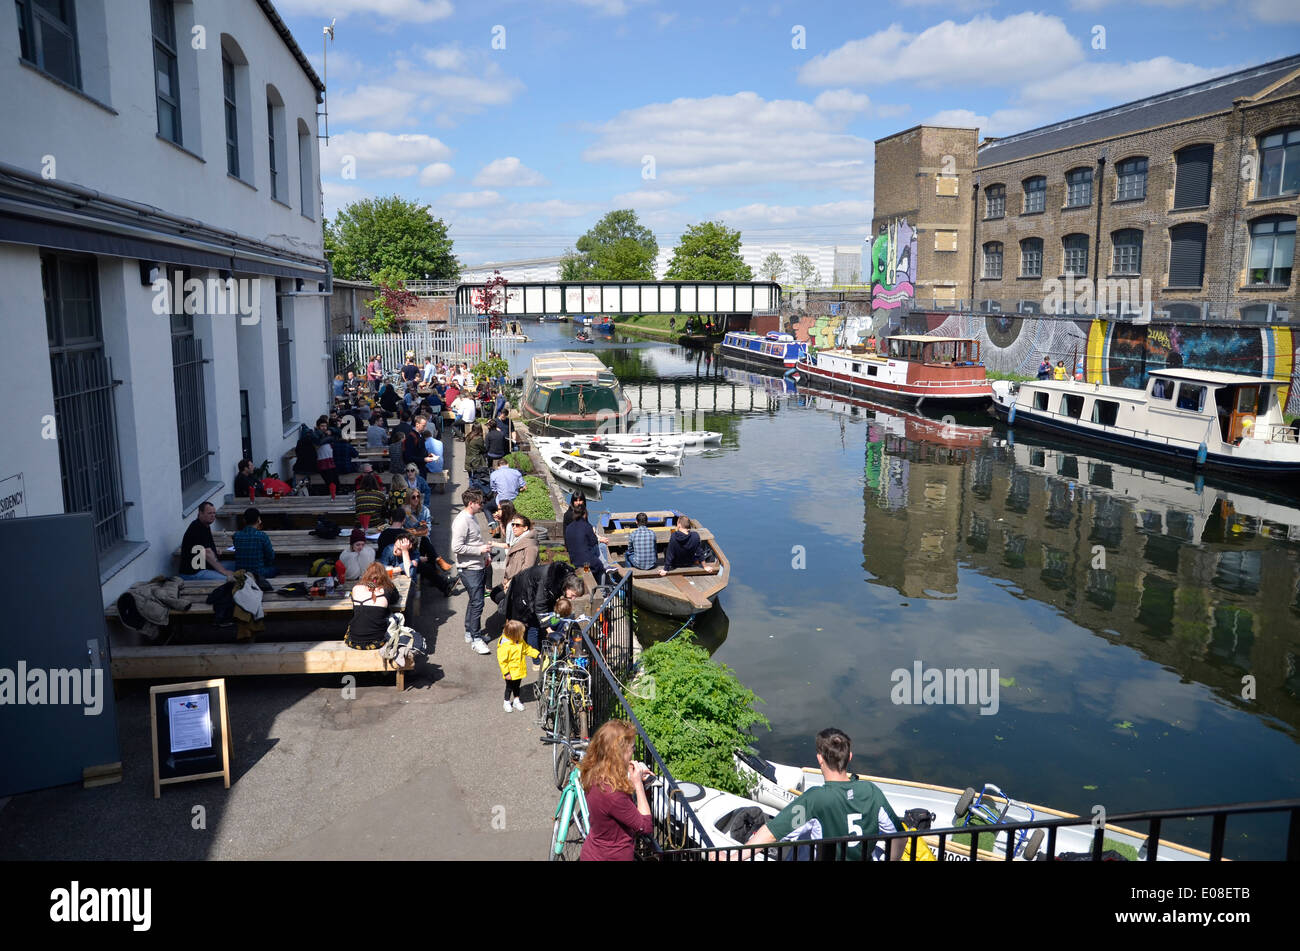 The Crate Brewery and Pizzeria on the River Lee in Hackney, East London Stock Photo